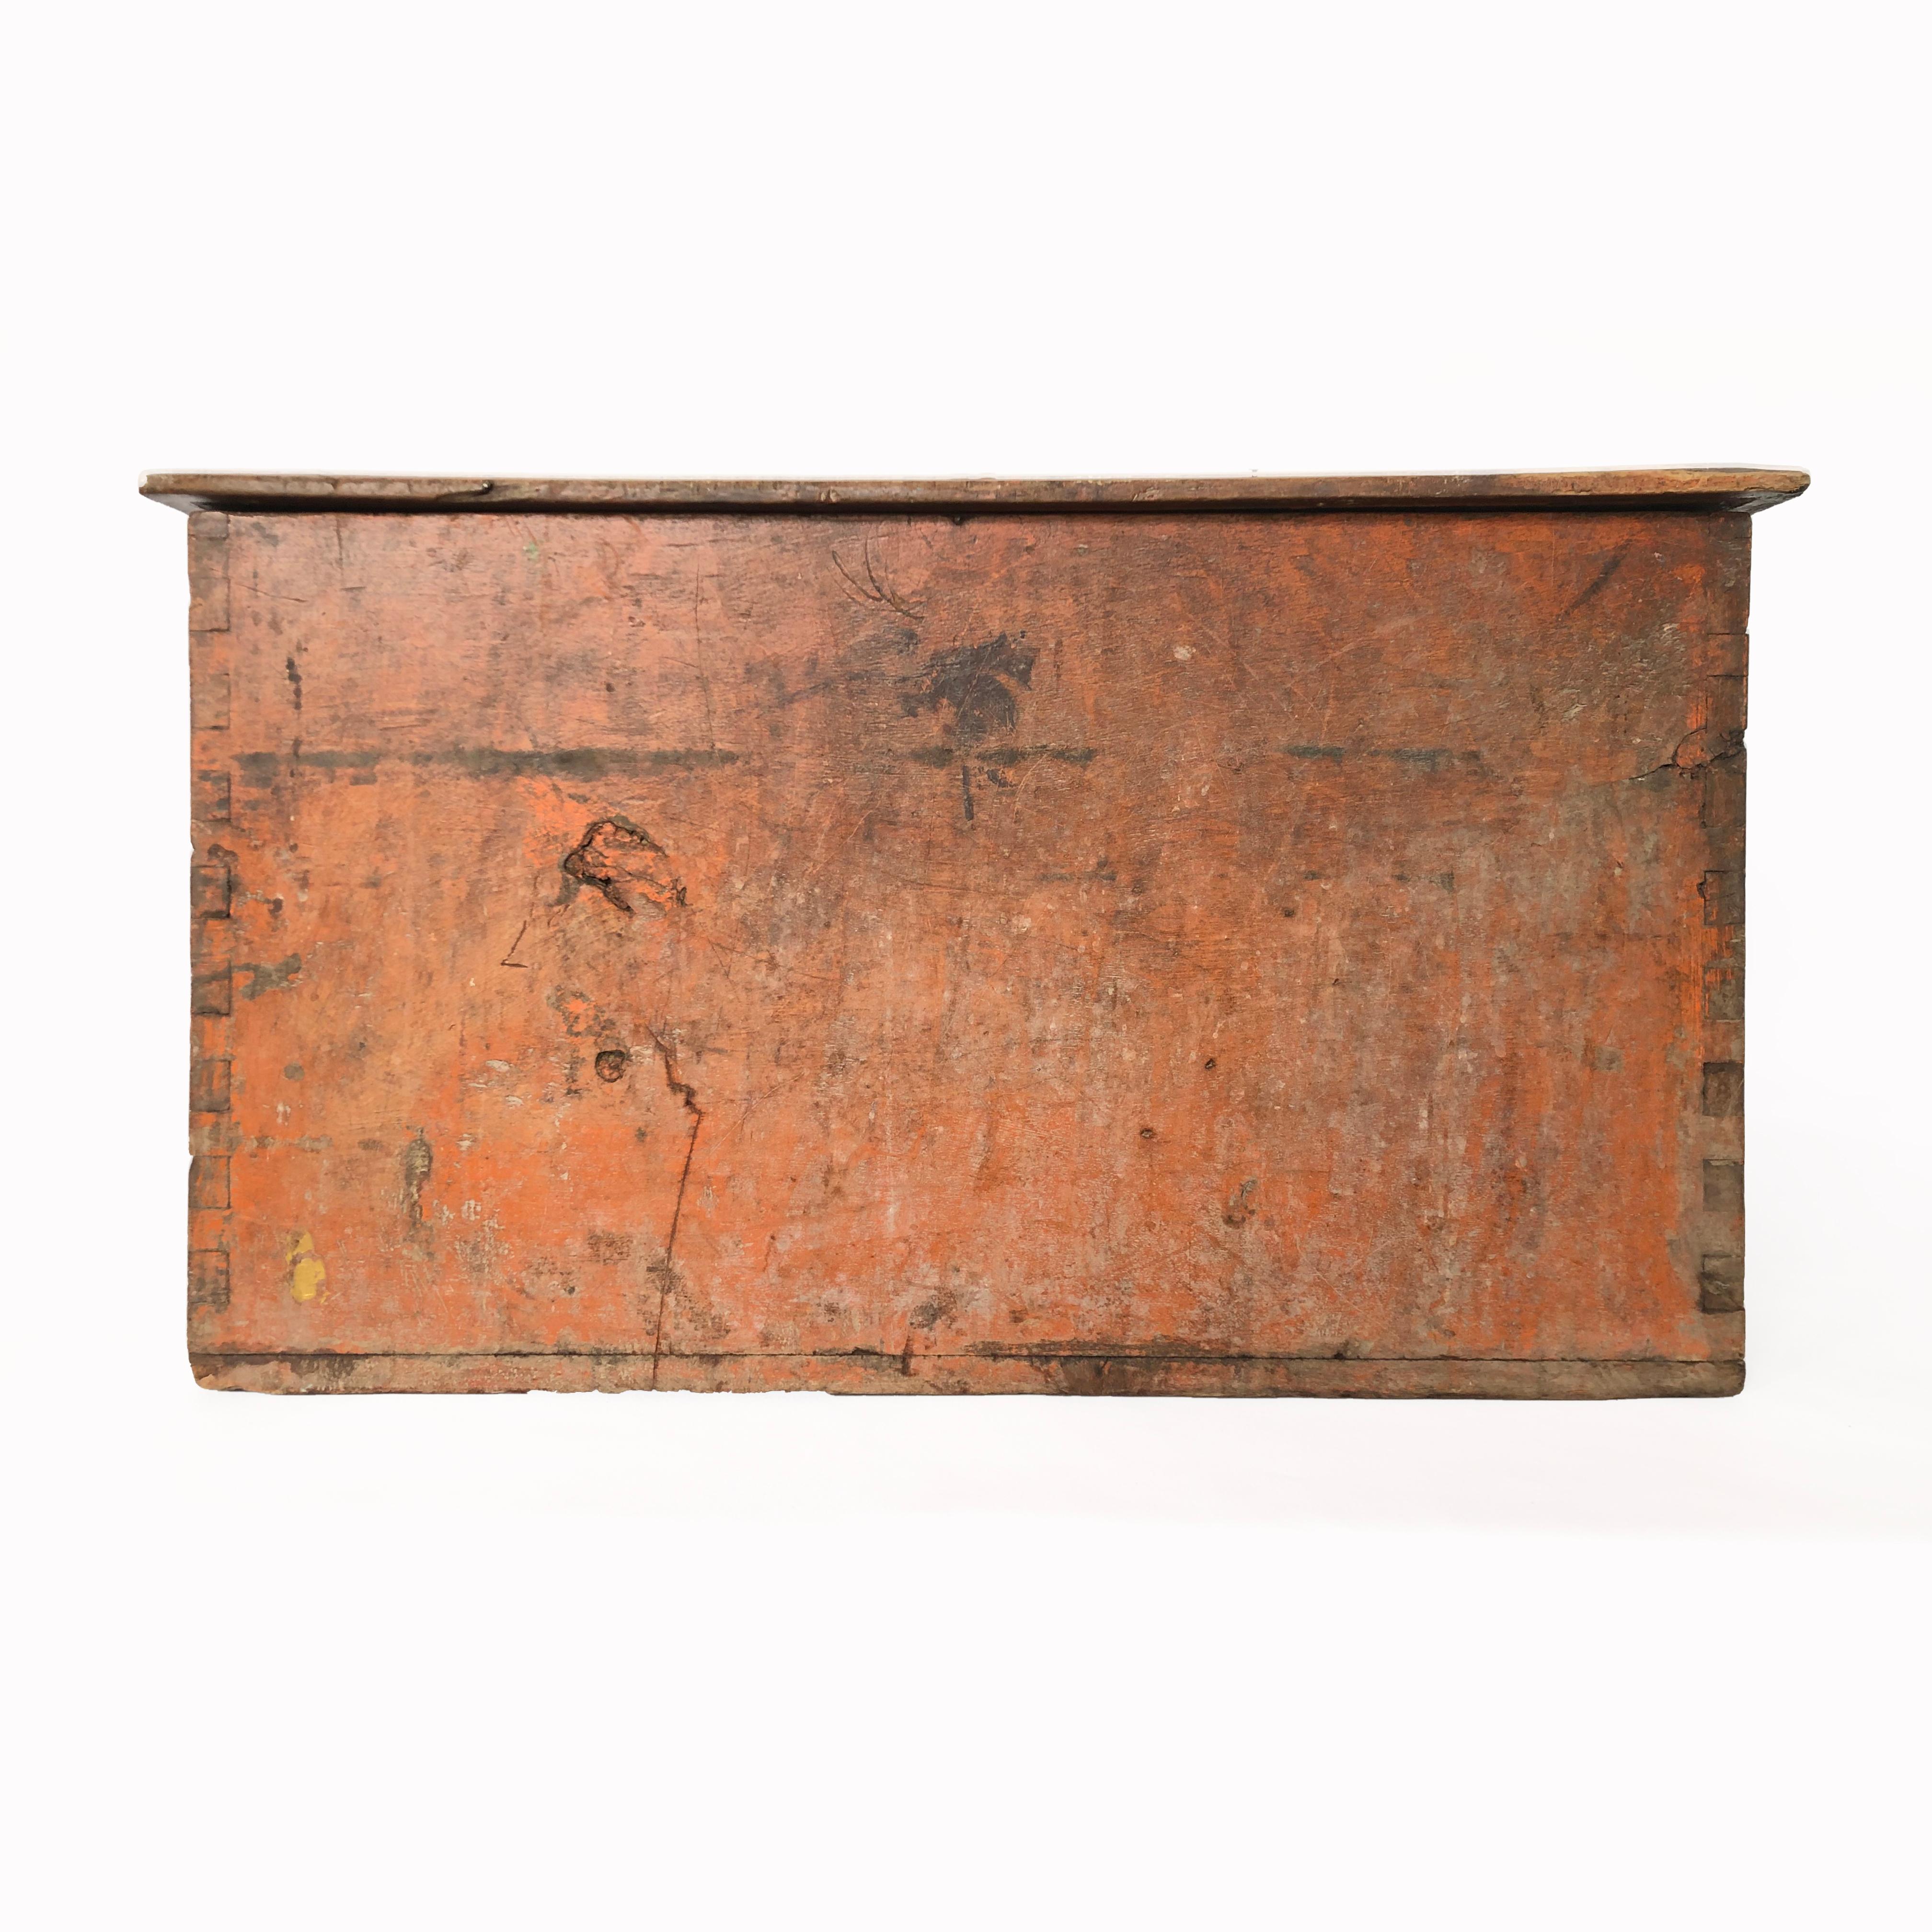 Beautiful mezquite wood trunk with remains of orange paint, found in Zacatecas, Western Mexico.
The piece in general shows wear but we find that it only adds character to this 250 year old trunk.
It will be a great piece with functional storage,